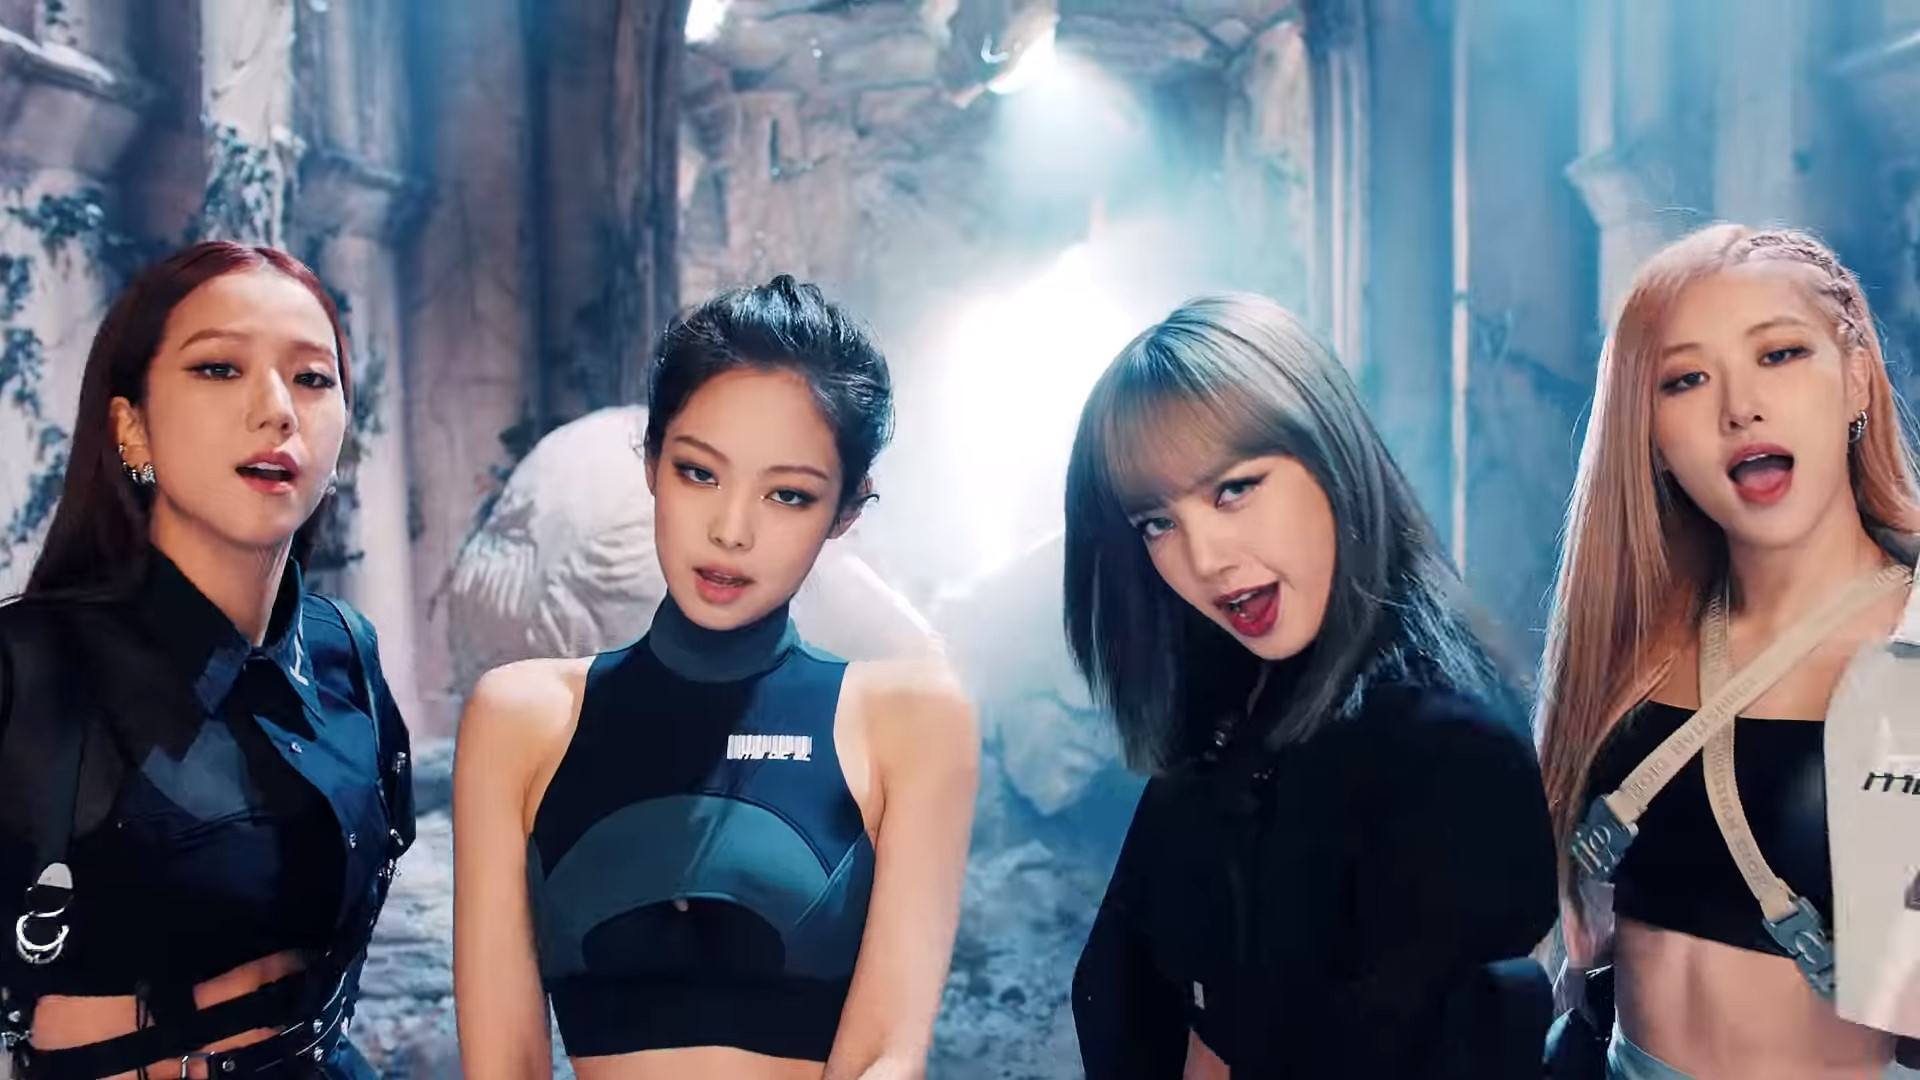 Blackpink Kill This Love Wallpapers - Top Free Blackpink Kill This Love ...